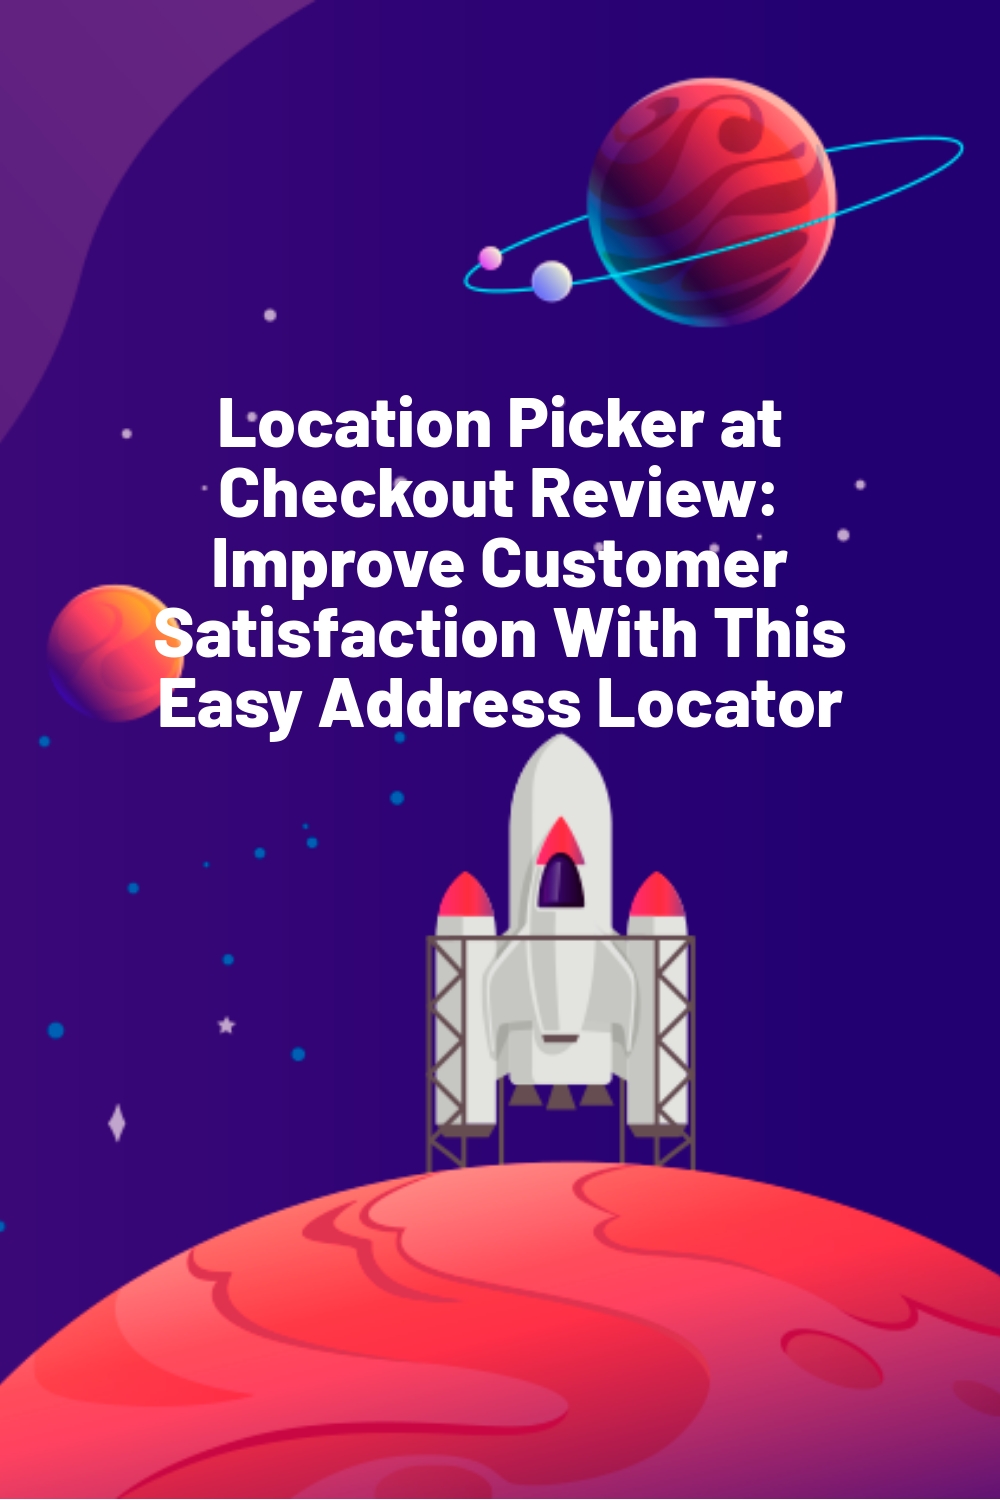 Location Picker at Checkout Review: Improve Customer Satisfaction With This Easy Address Locator